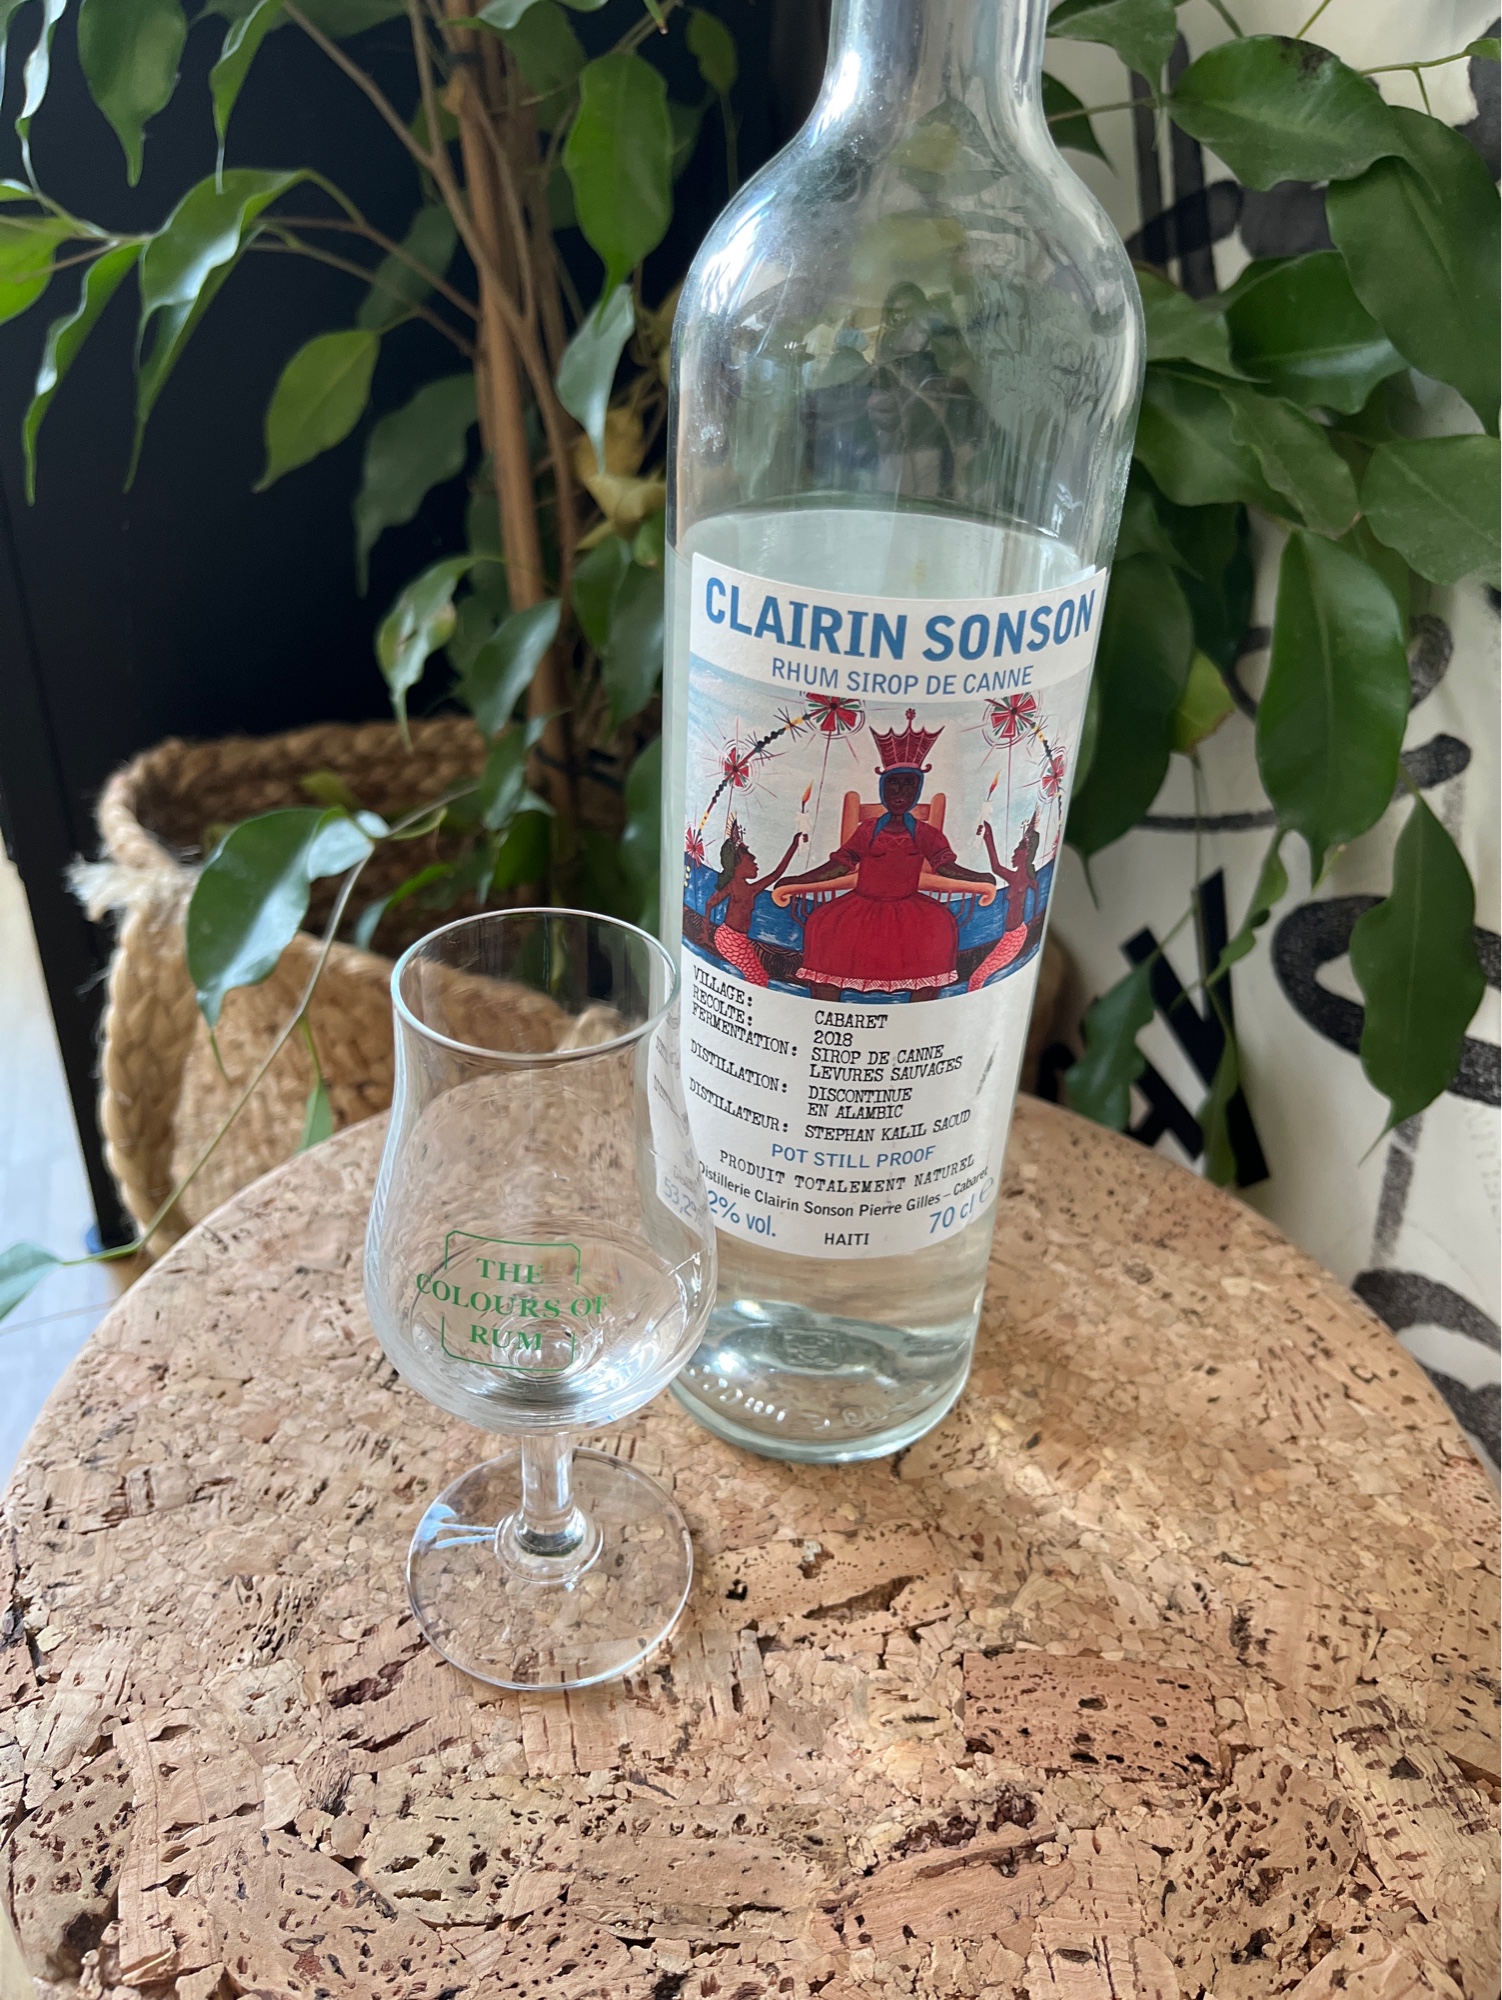 Photo of the bottle taken from user Serge